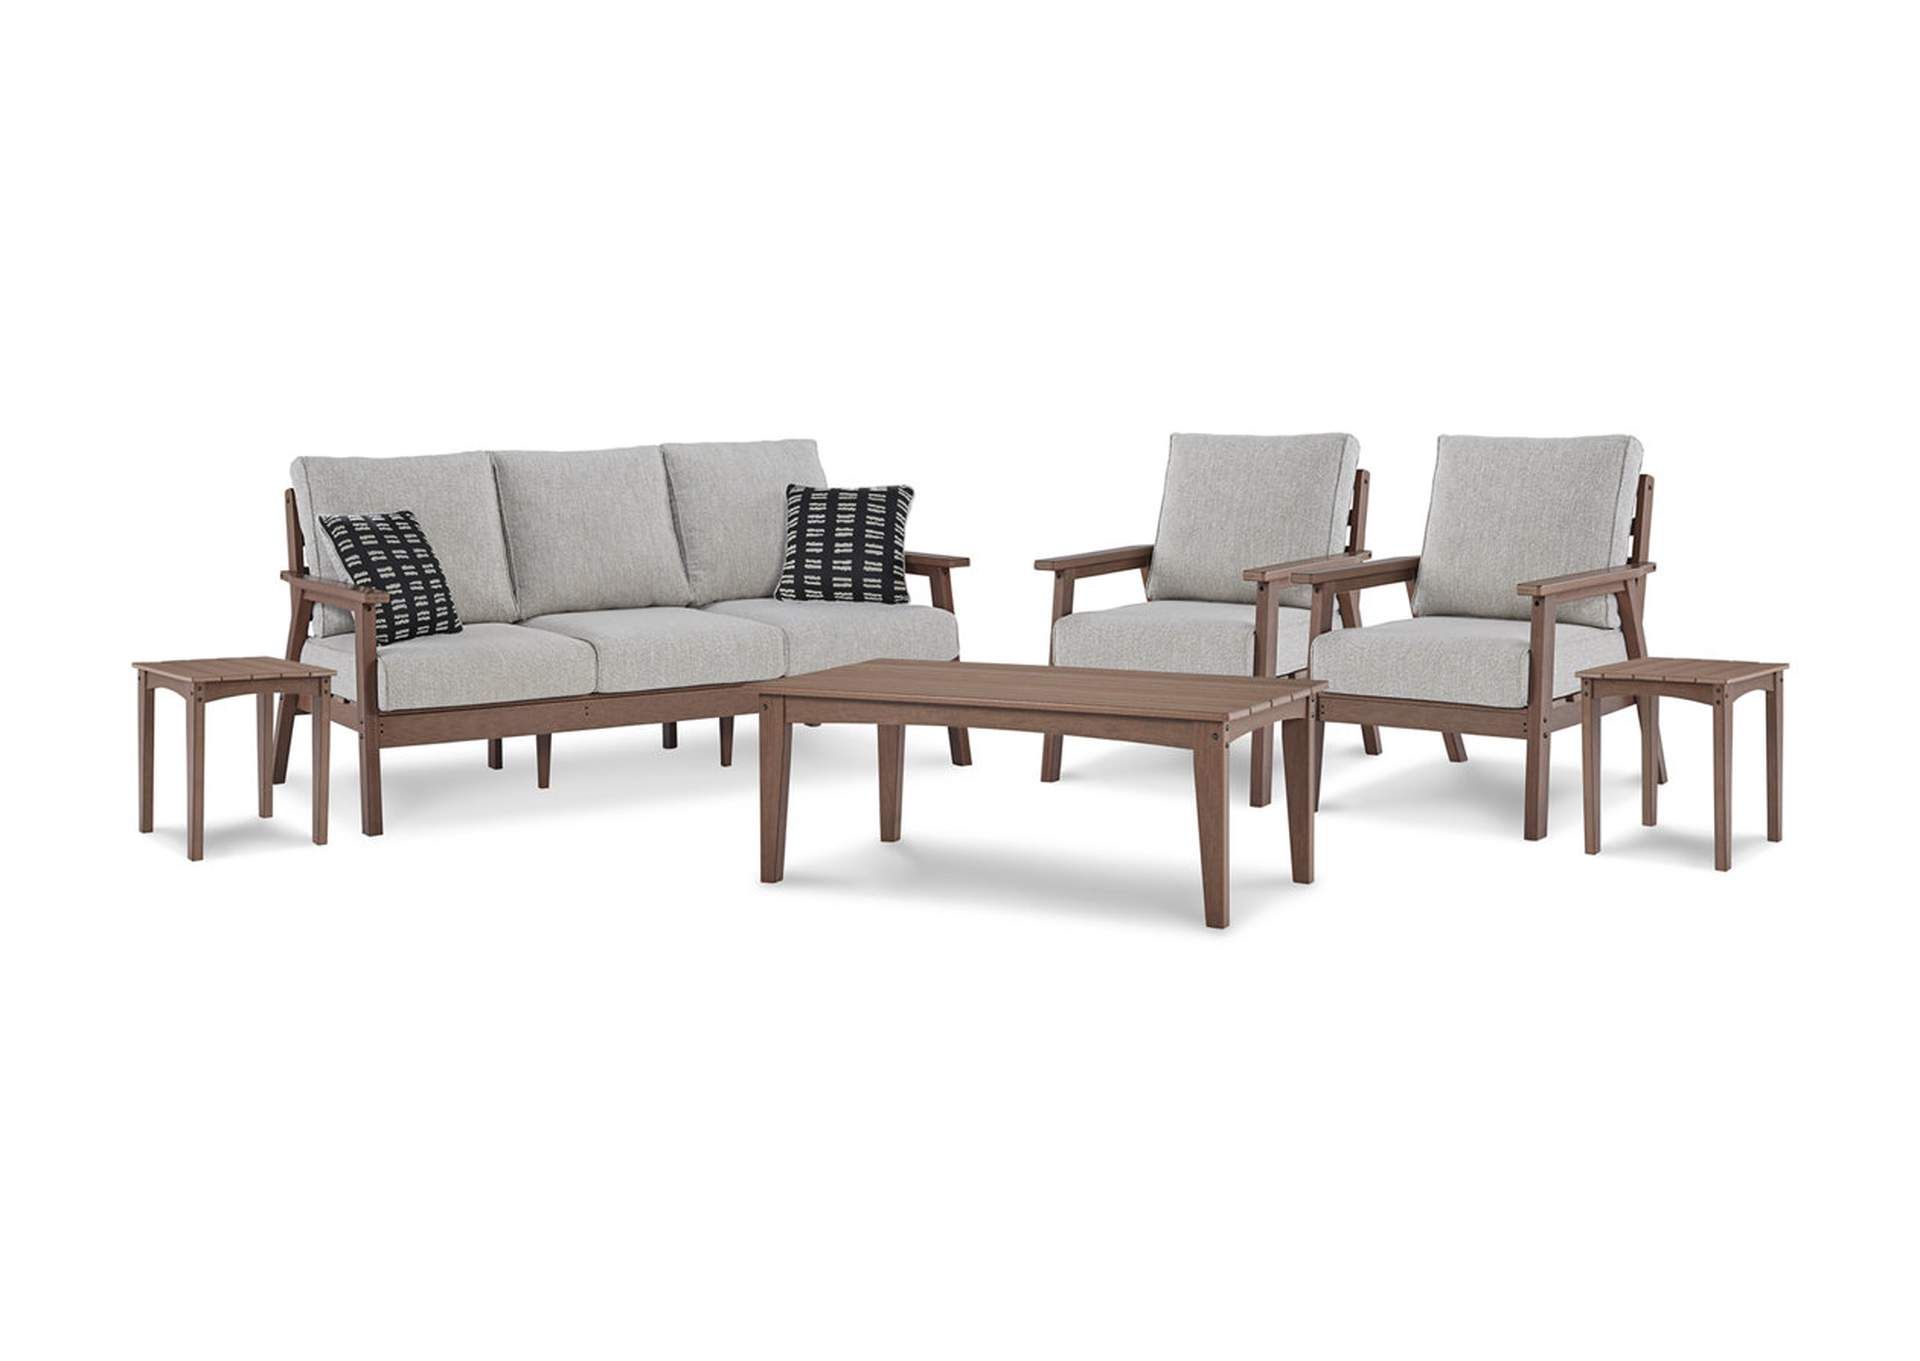 Trendy Emmeline Outdoor Sofa And 2 Lounge Chairs With Coffee Table And 2 End Tables  Ivan Smith Furniture With Outdoor 2 Arm Chairs And Coffee Table (View 13 of 15)